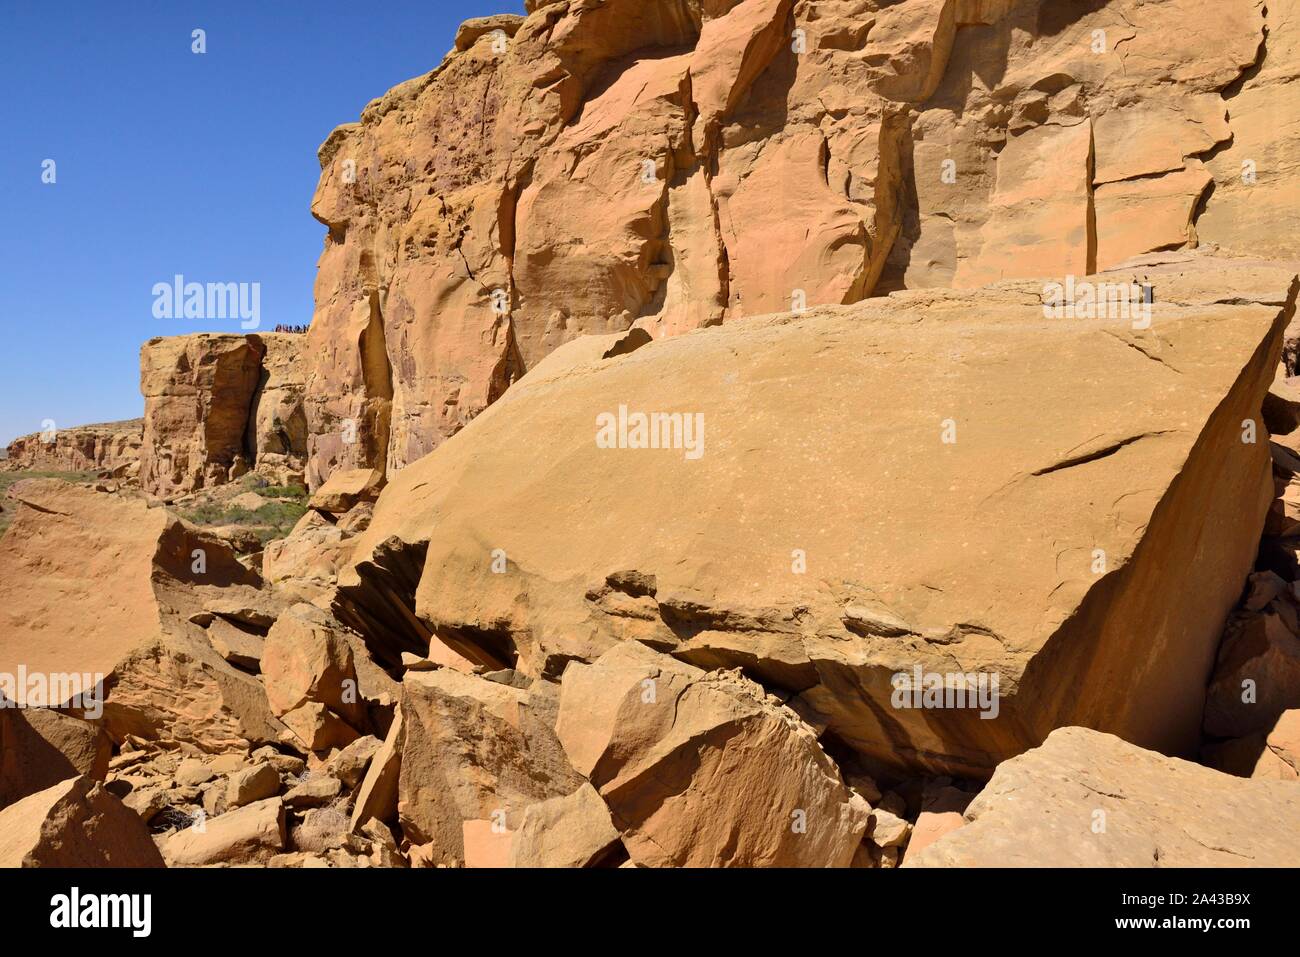 People on the Bonito Overlook, Remains of Threatening Rock which fell 1/22/1941, Pueblo Bonito (850-1250s), Chaco Canyon, NM 190912 61339 Stock Photo